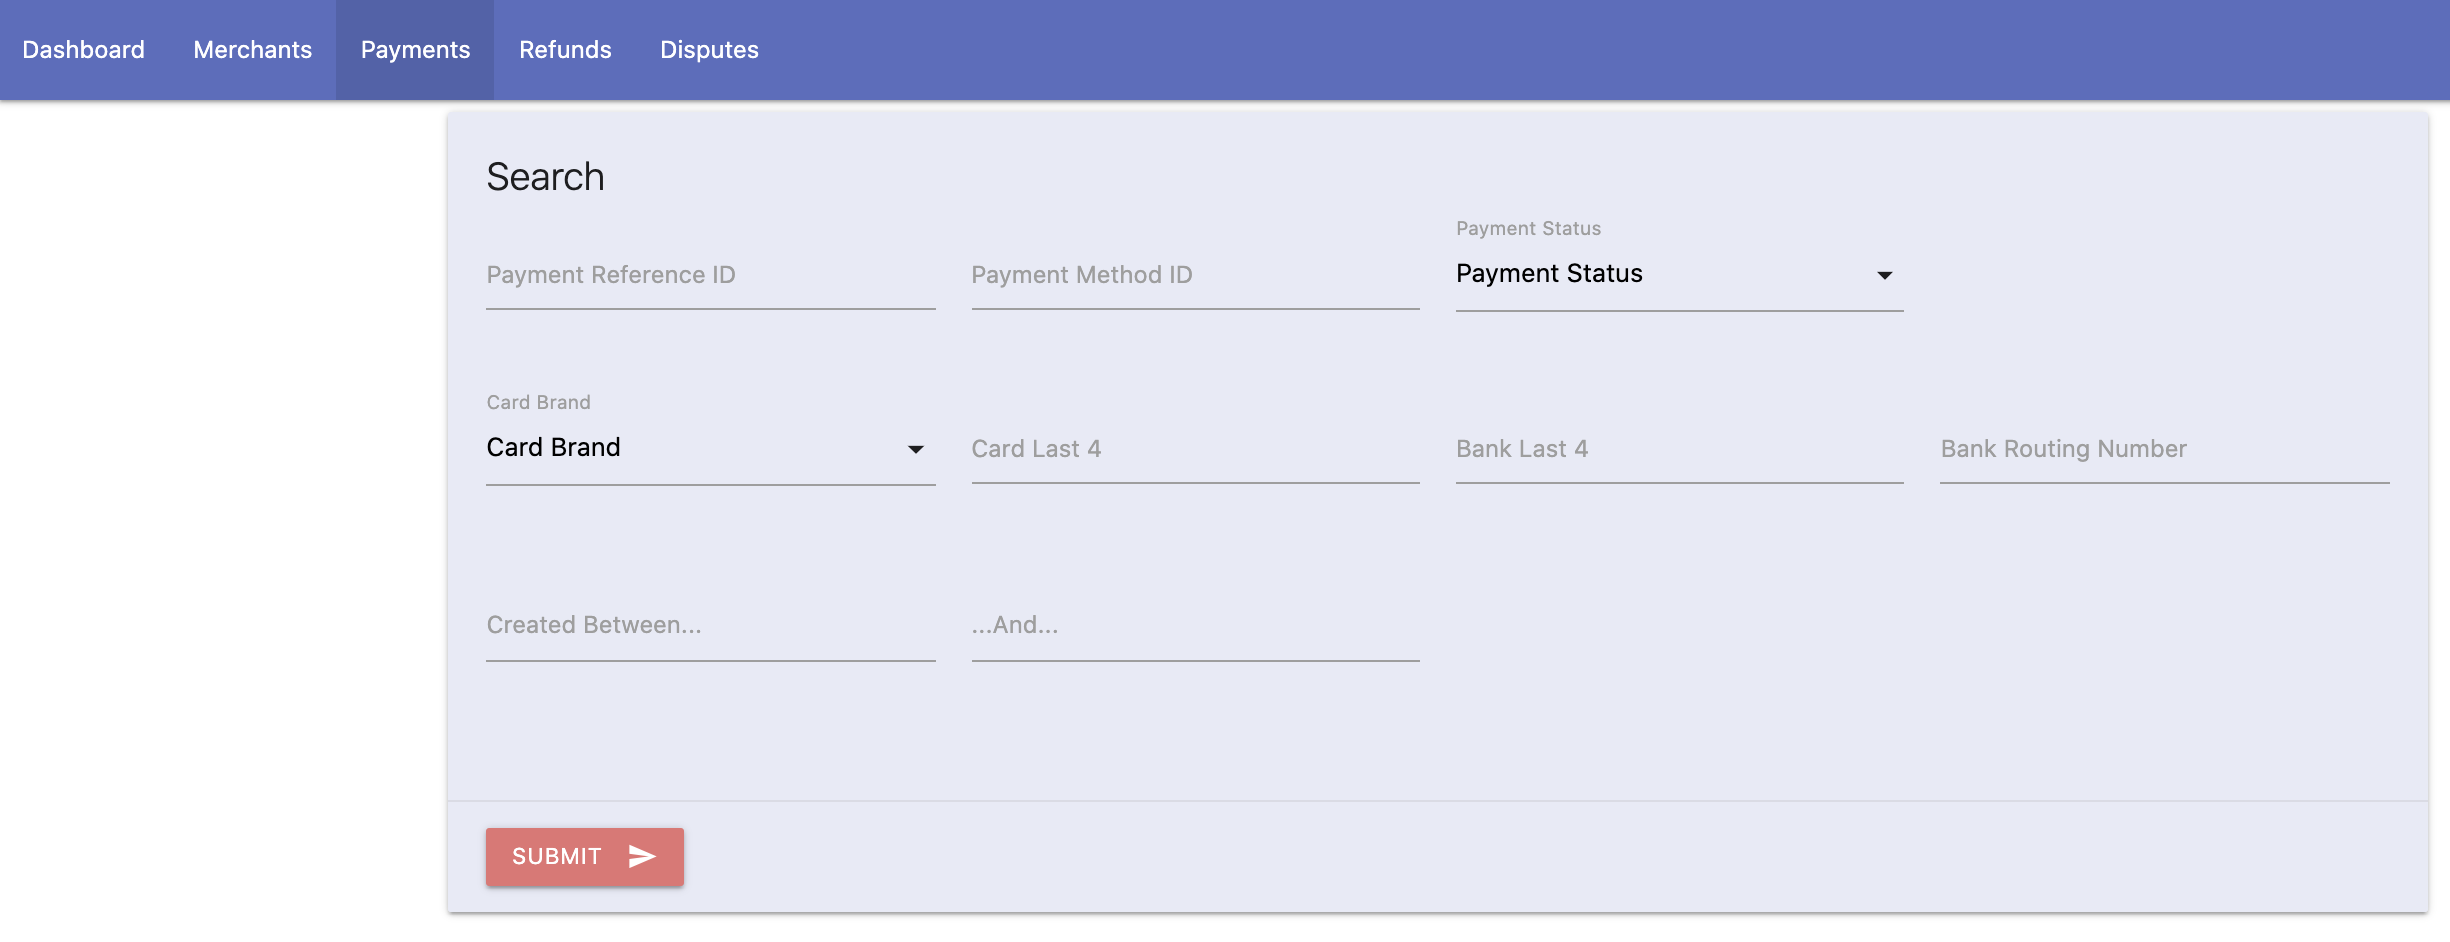 An example custom interface for your employees to search payments across your mercants.